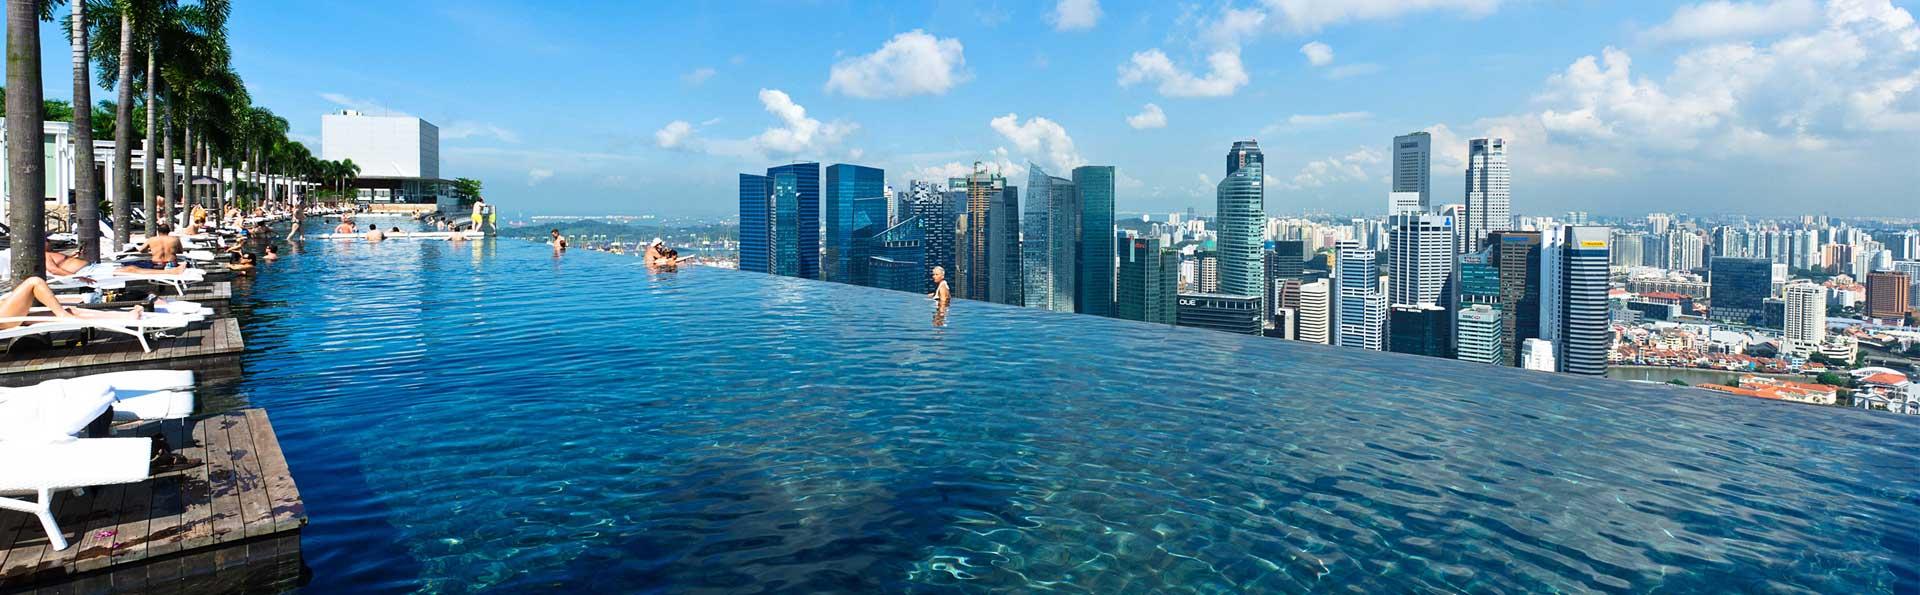 infinity-pool-banner-day